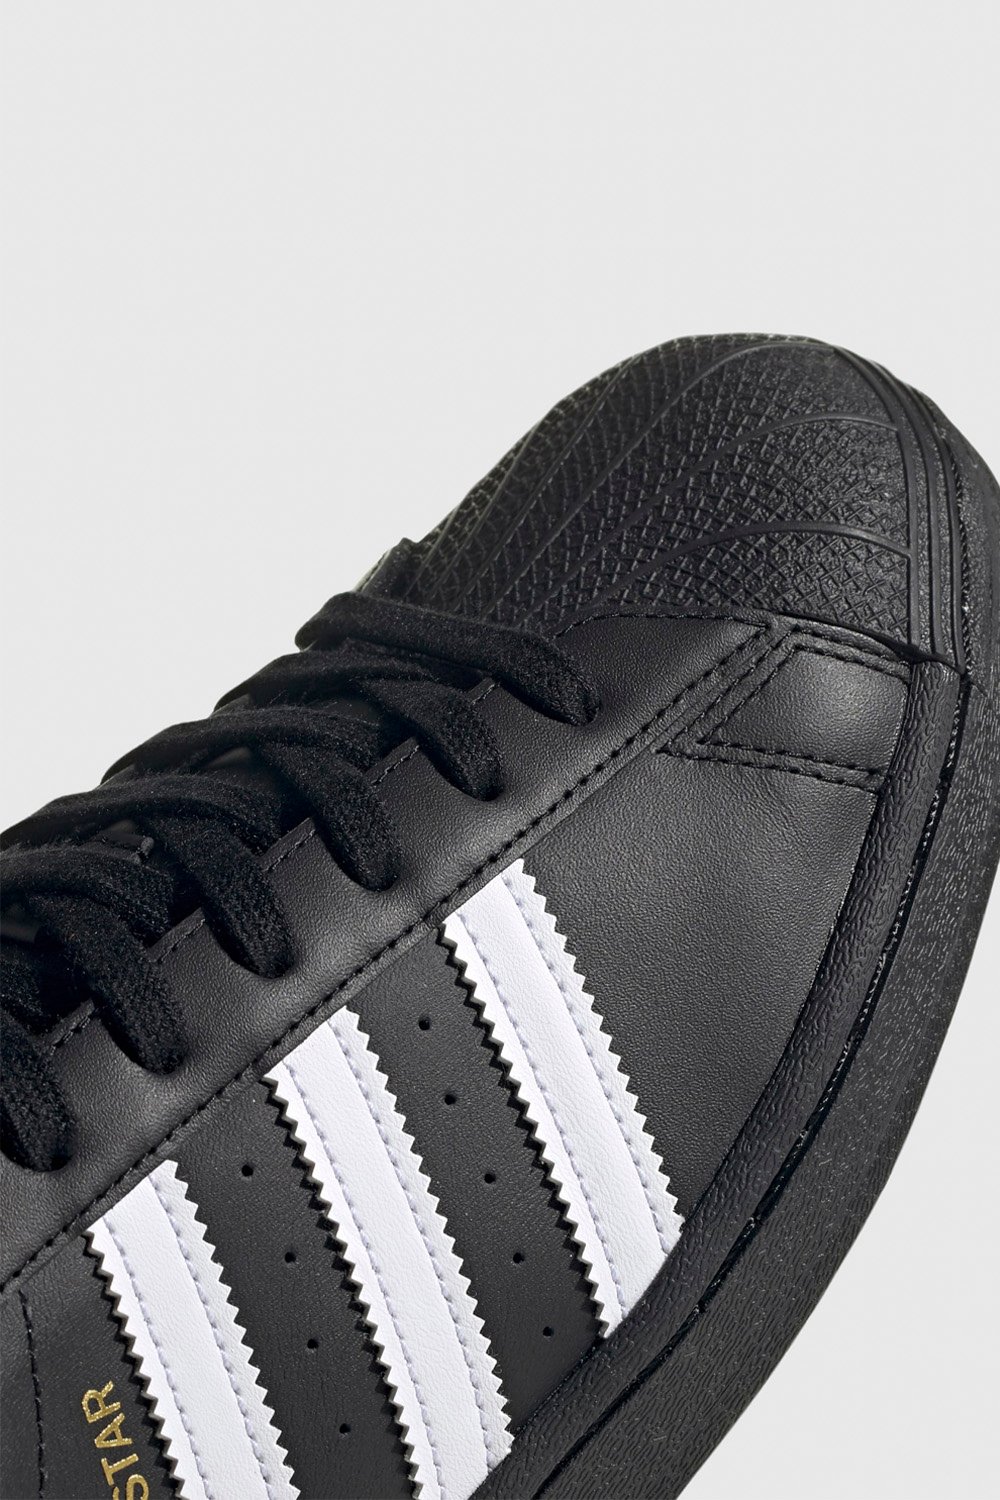 adidas, Shoes, Adidas Shell Toe Old School Hip Hop 3 Stripes Sneakers